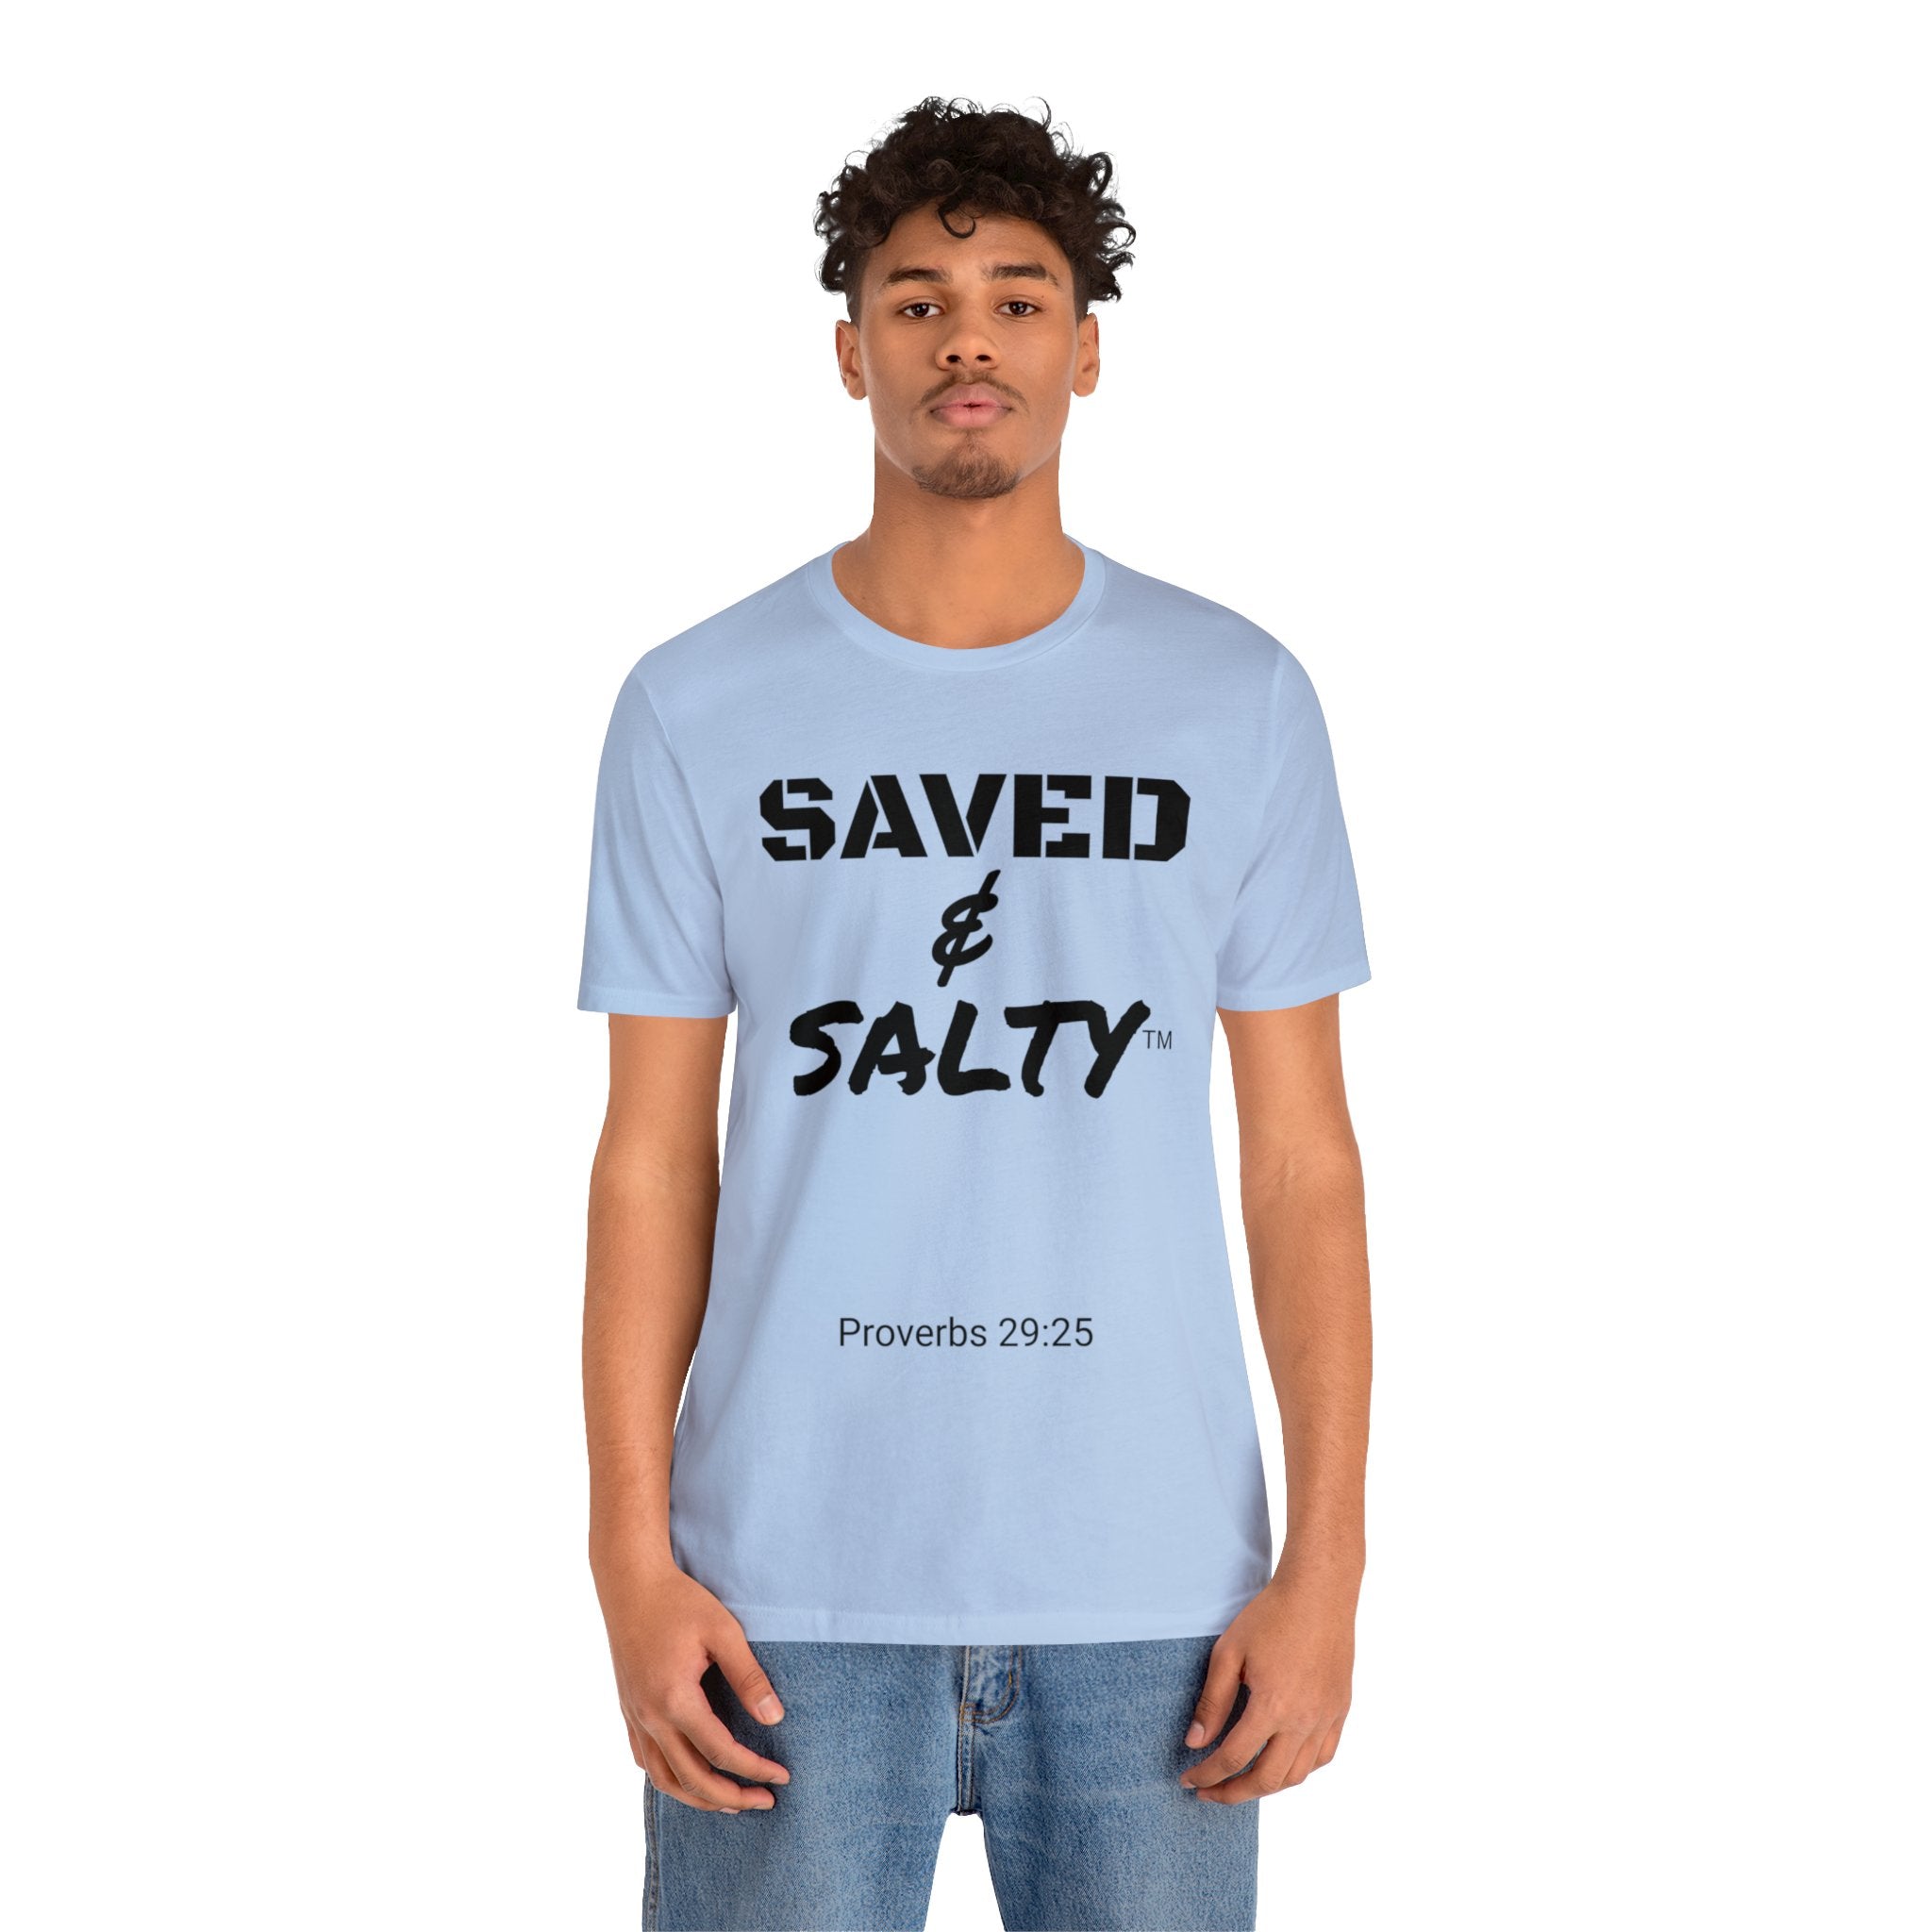 #Saved&Salty #Scripture #Proverbs 29:25 #2Timothy1:7 #Unisex #Jersey #ShortSleeve #Tee